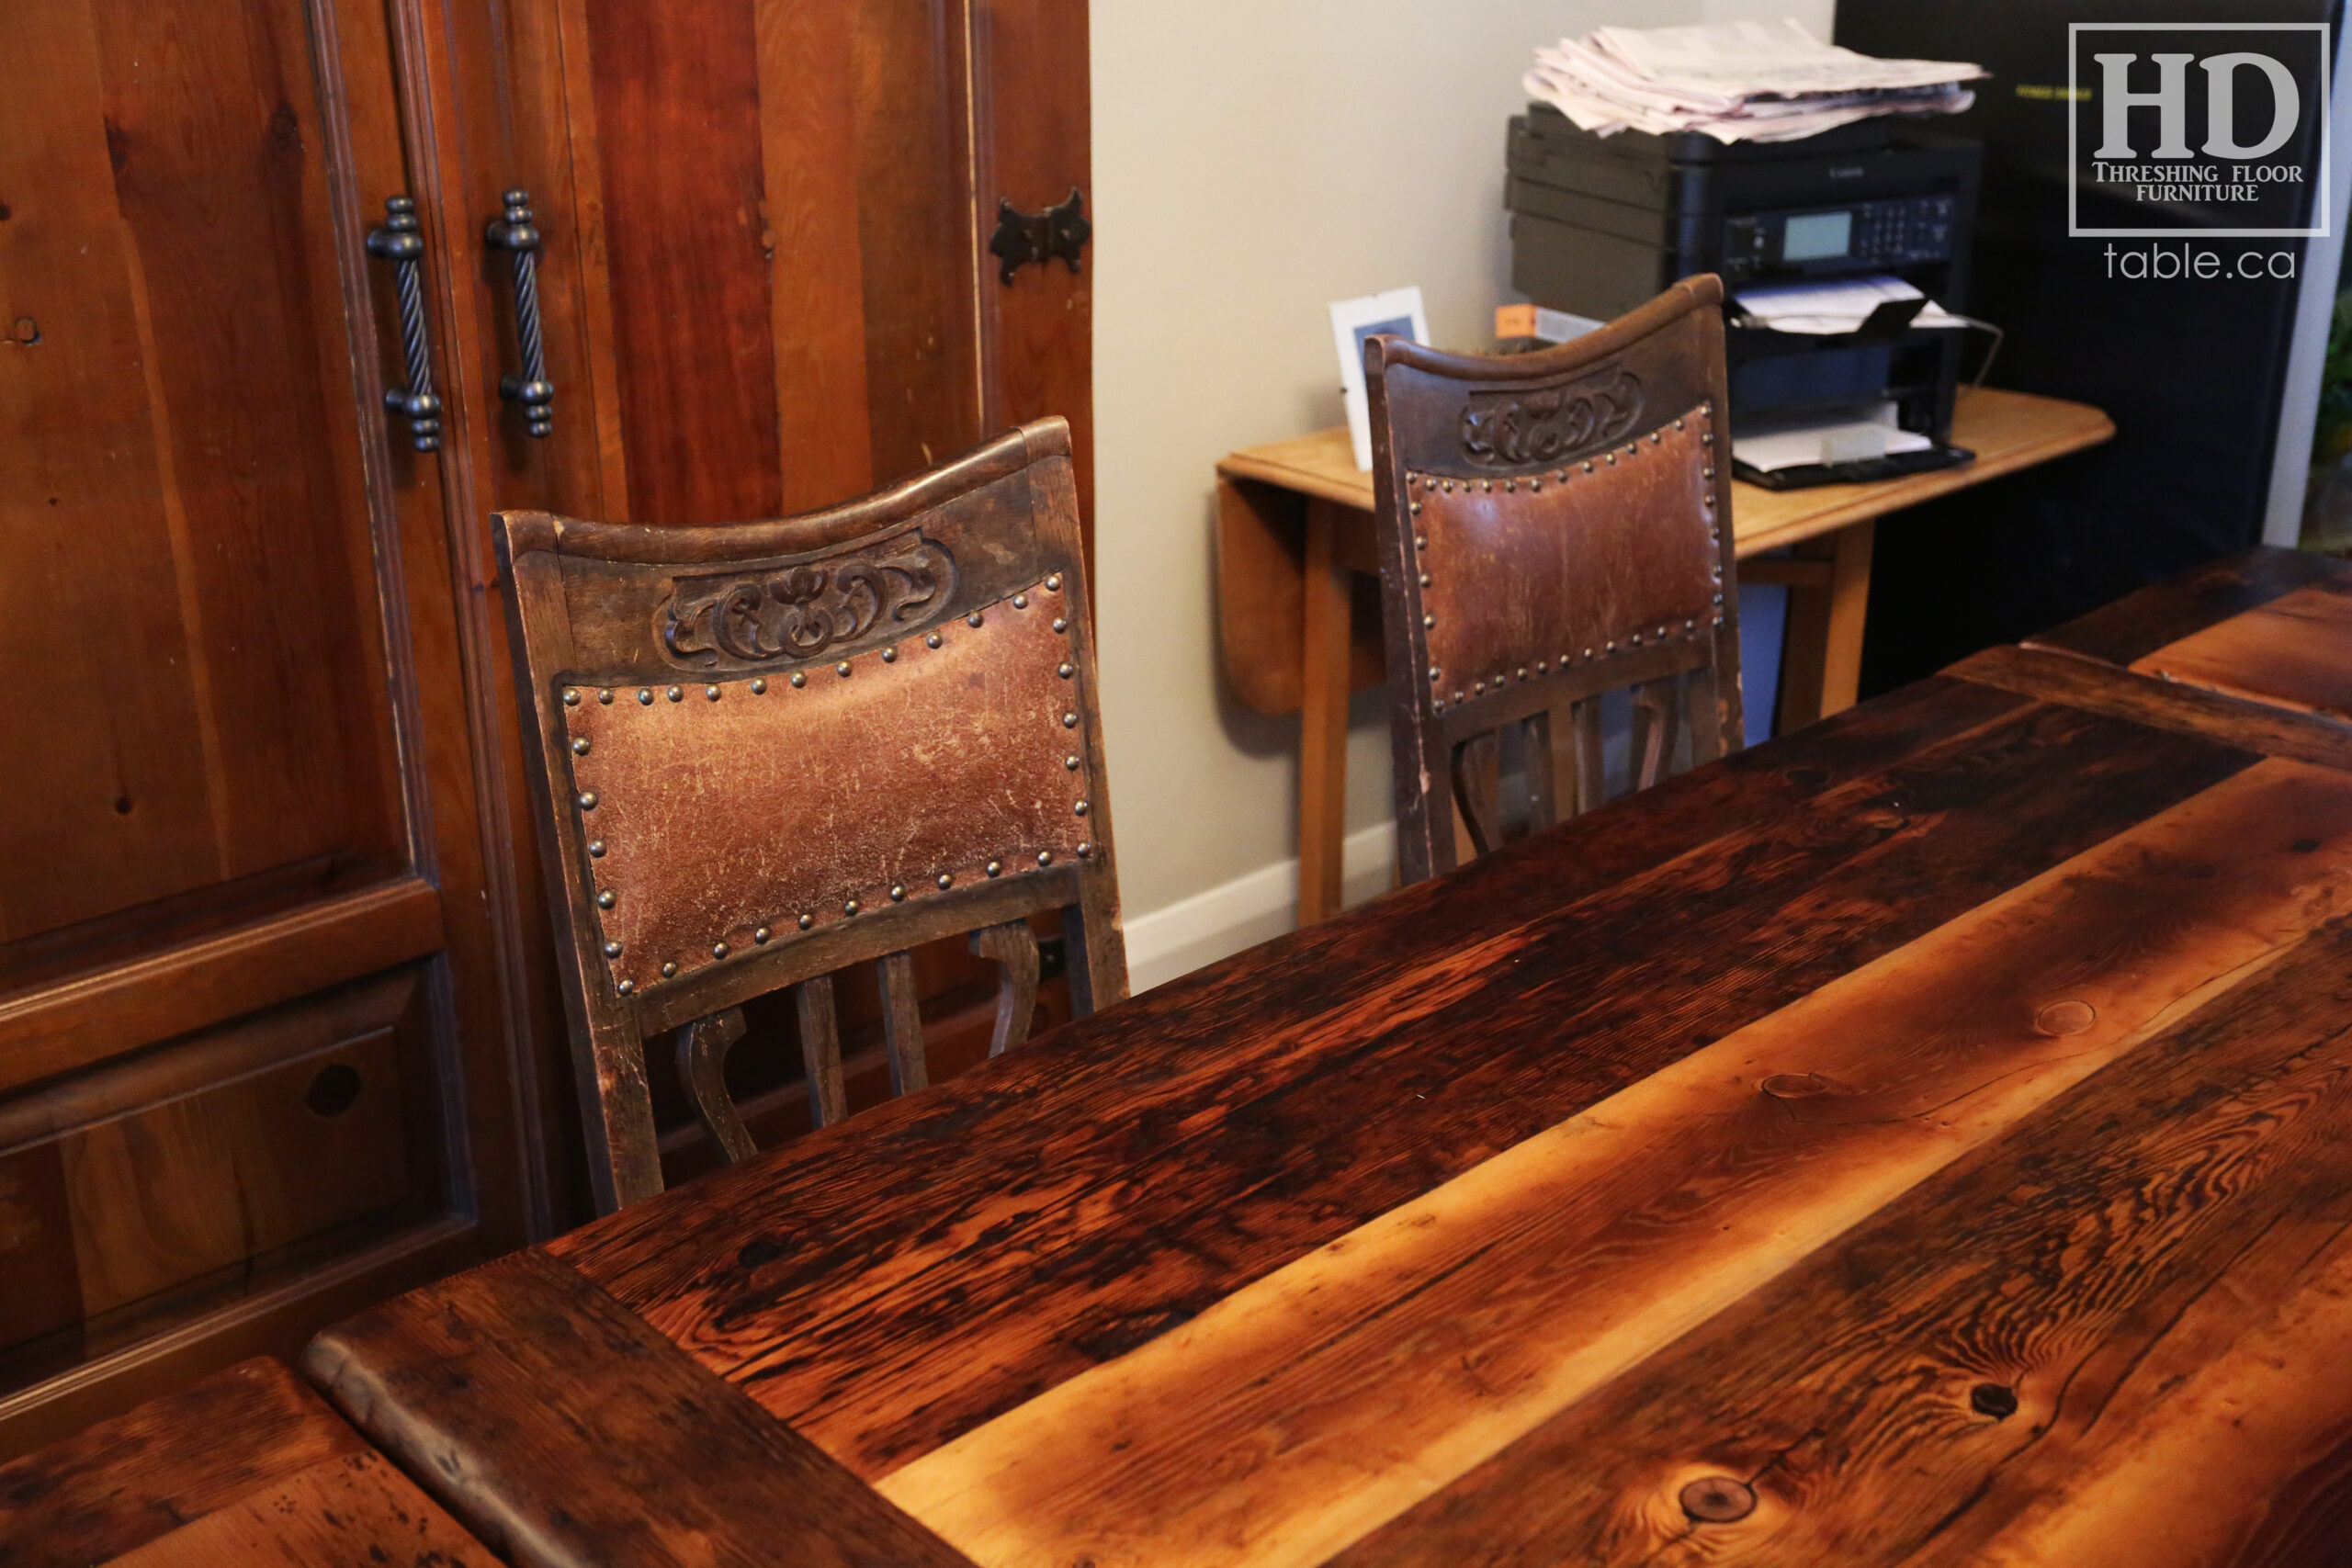 Reclaimed Wood Table with Epoxy + Polyurethane Finish by HD Threshing Floor Furniture / www.table.ca